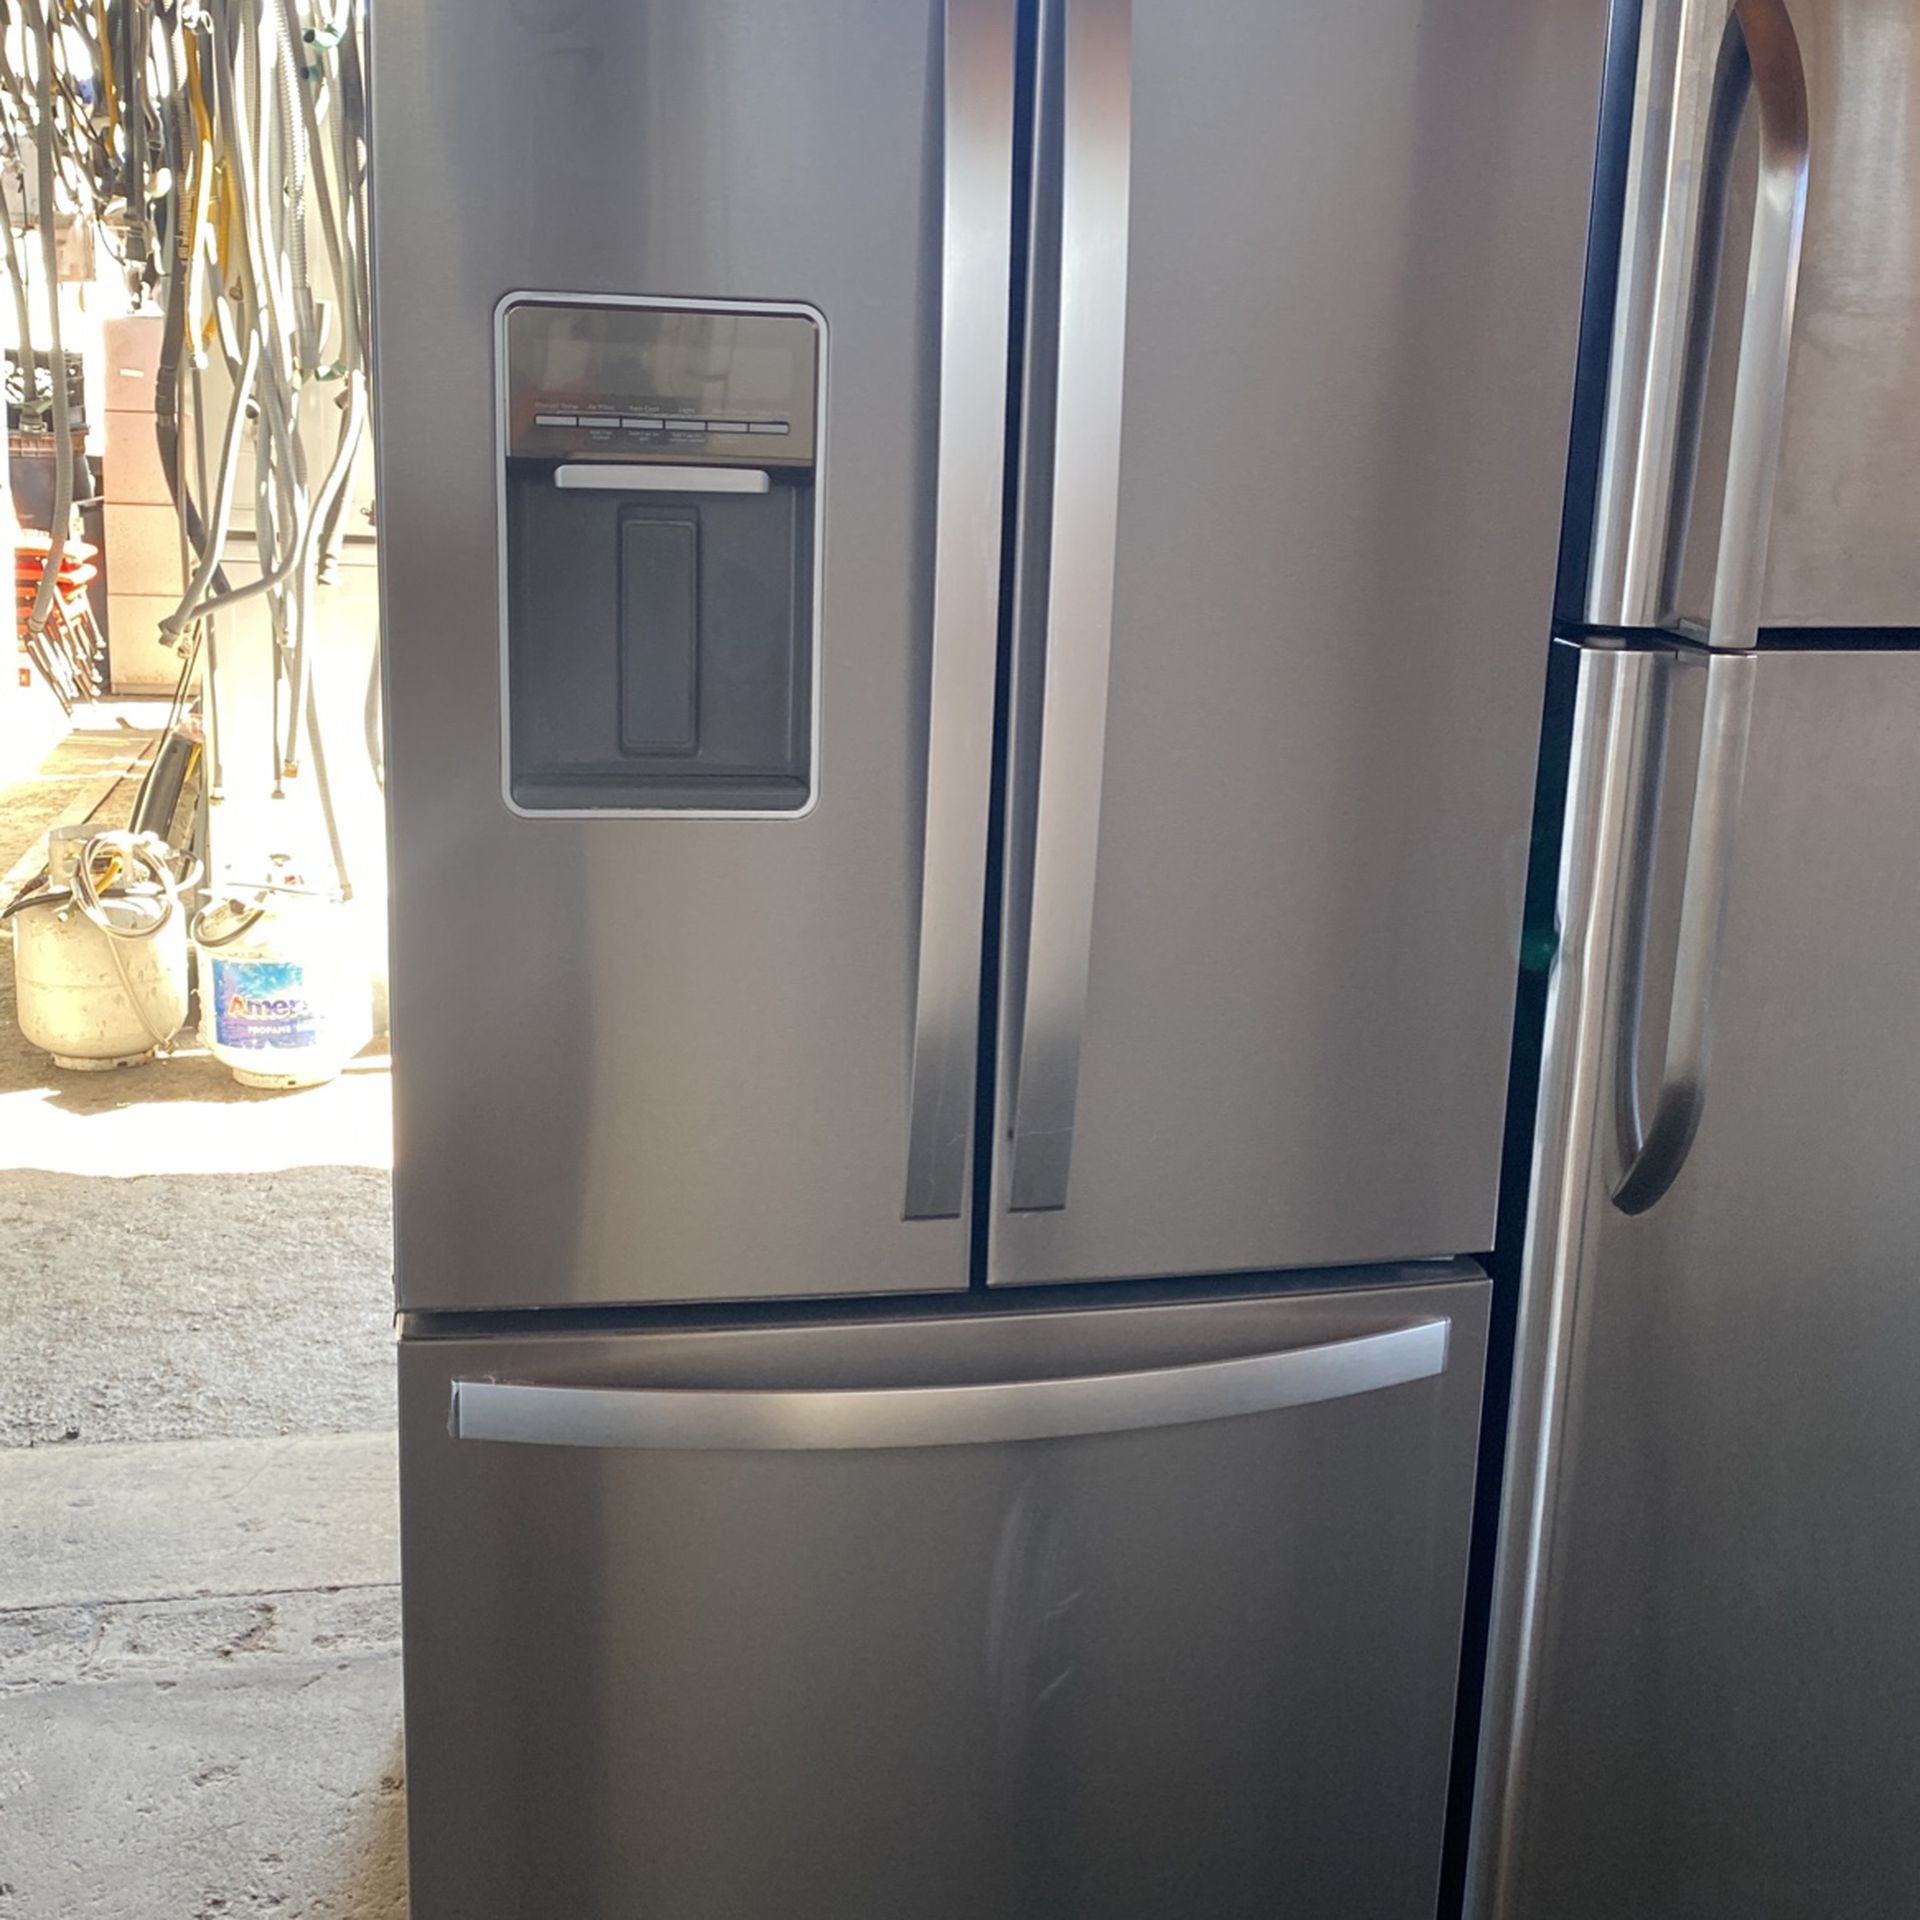 WHIRLPOOL FRENCH DOOR STAINLESS REFRIGERATOR 33” W